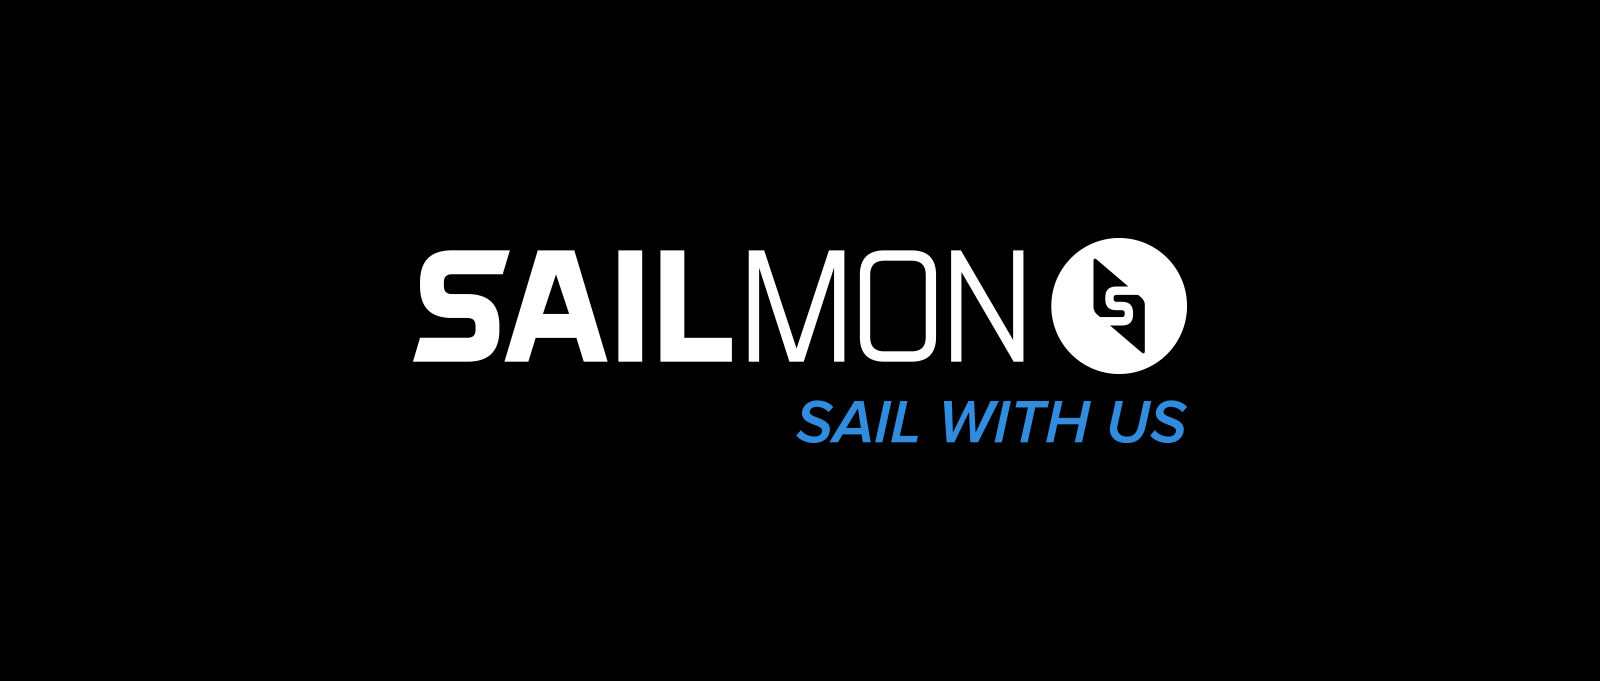 NORTH TECHNOLOGY GROUP EXPANDS TECHNOLOGY PORTFOLIO WITH ADDITION OF SAILMON